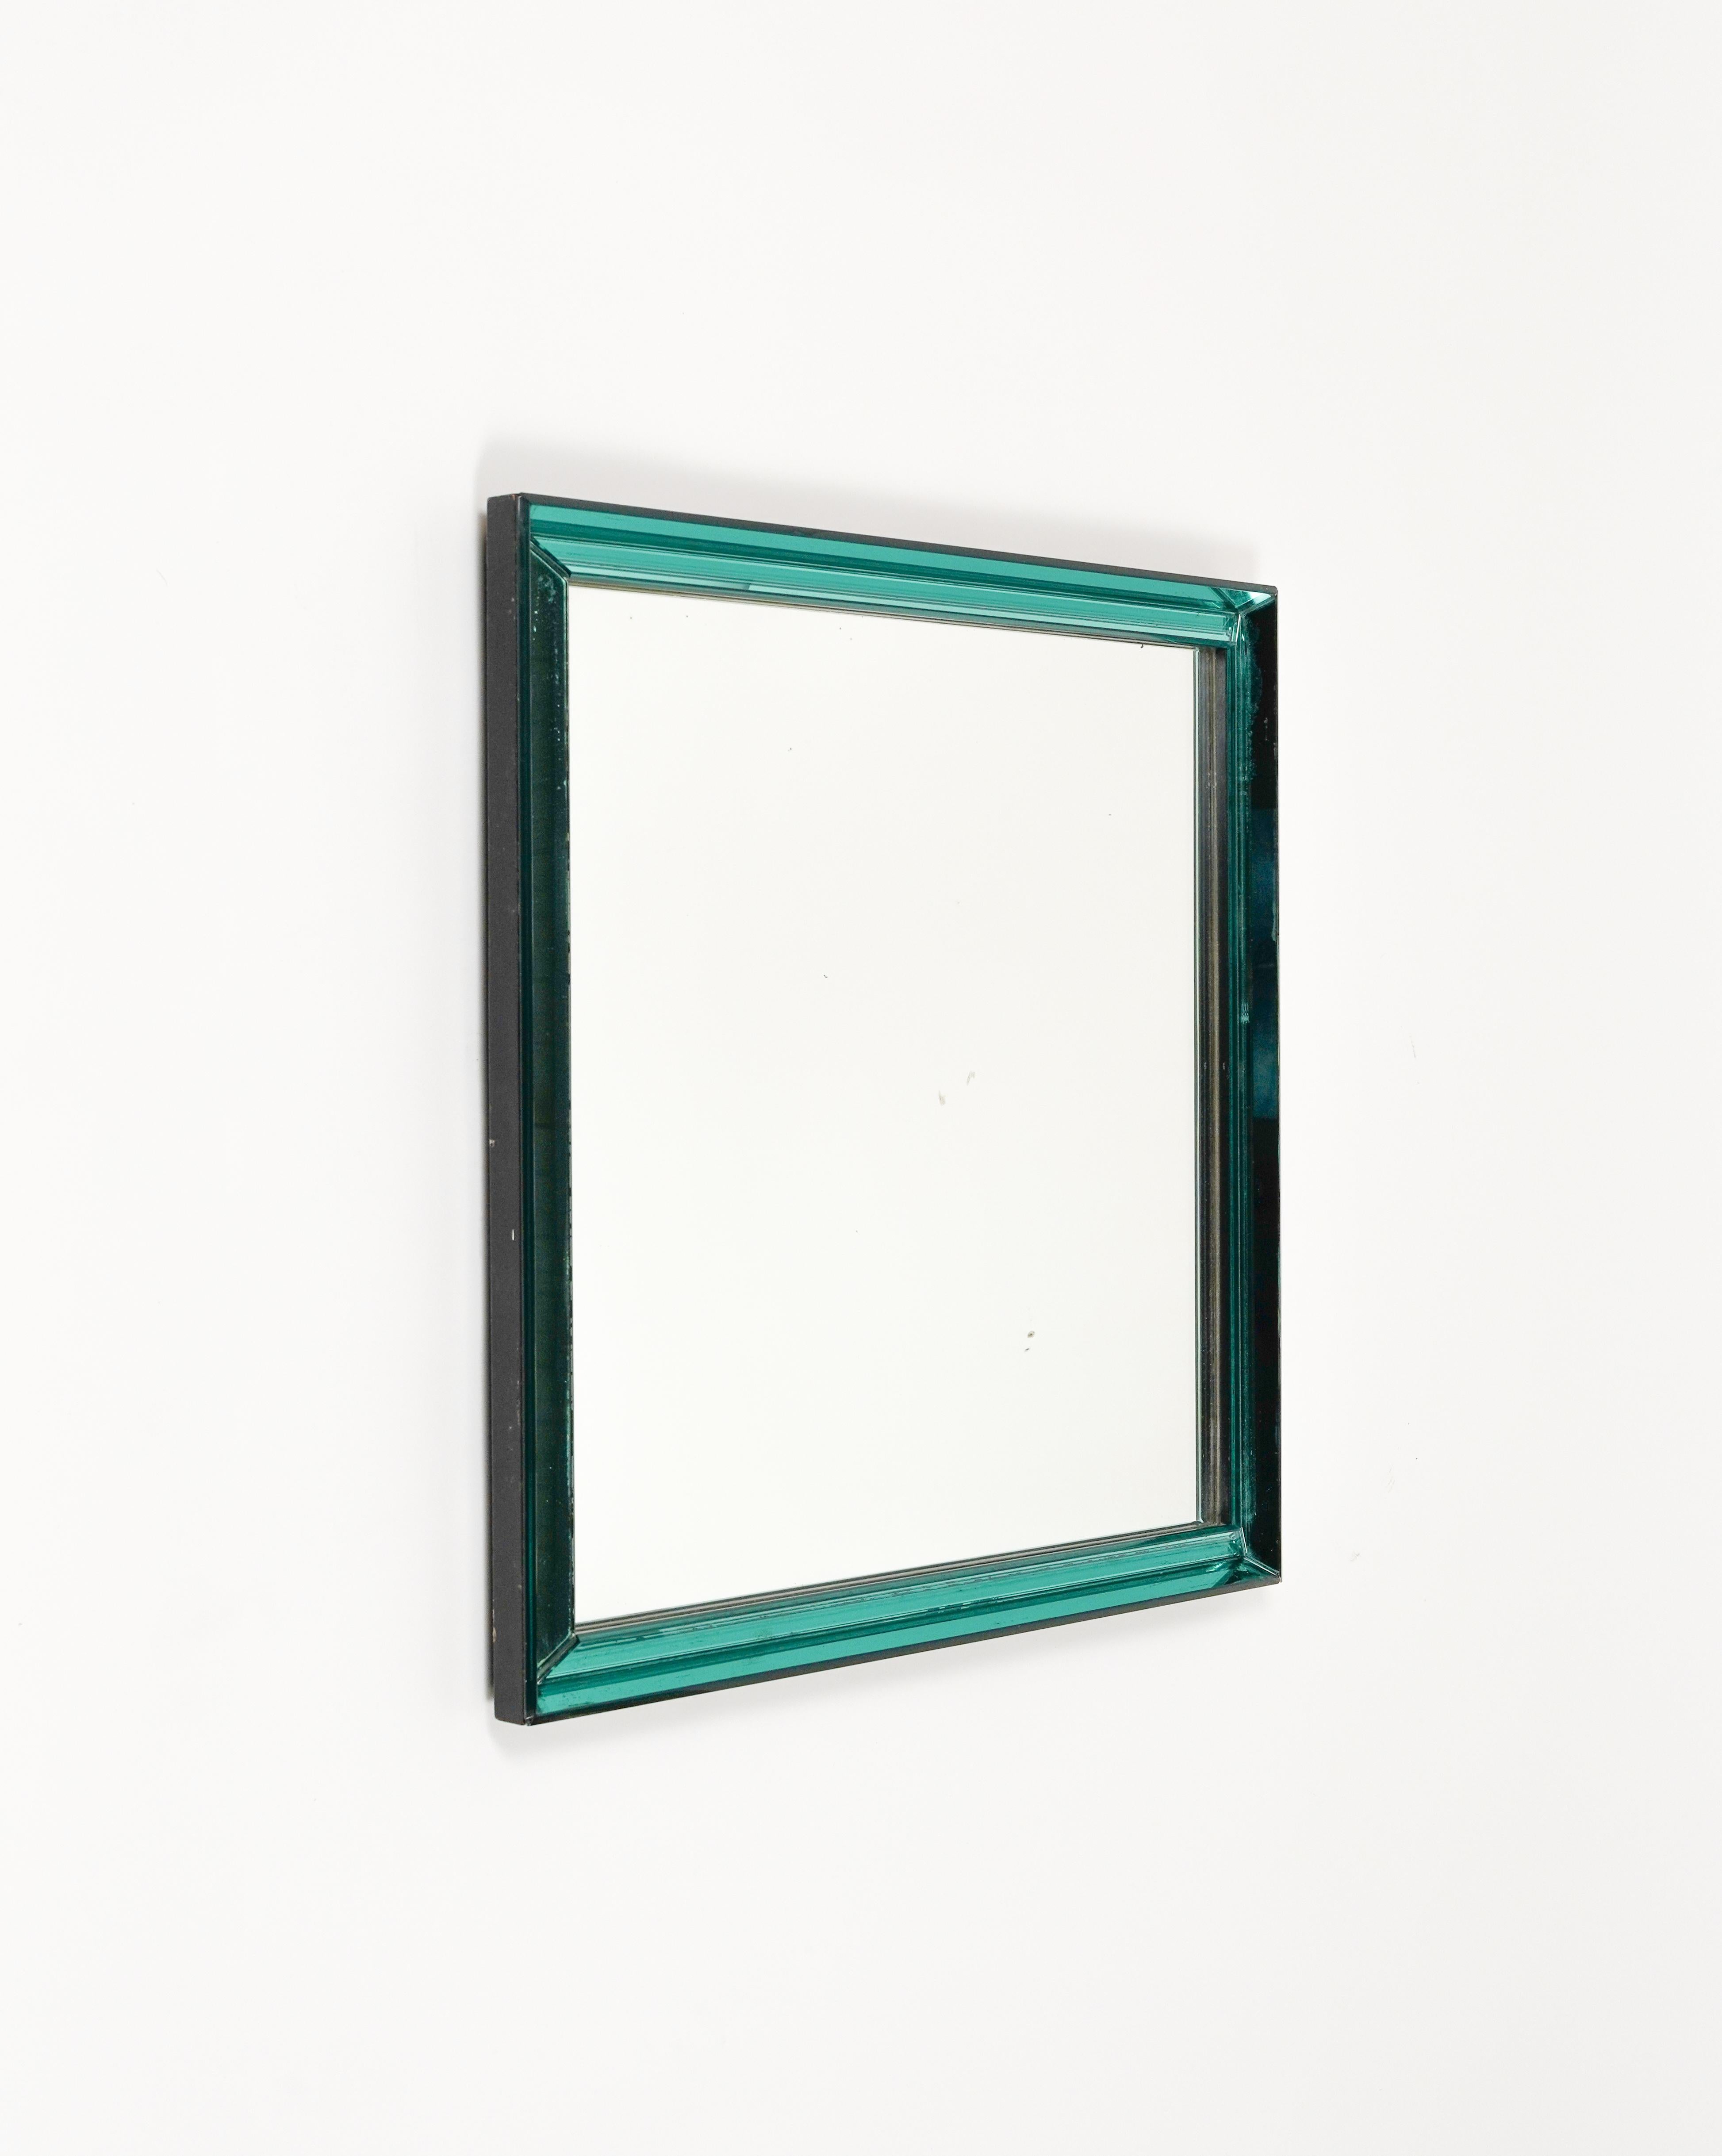 Midcentury amazing squared wall mirror model 2377 mirrored coloured cut glass frame black wood fitting by Max Ingrand for Fontana Arte.

Made in Italy 29 - January - 1965.

The original stamp is still visible on the back, as shown in the